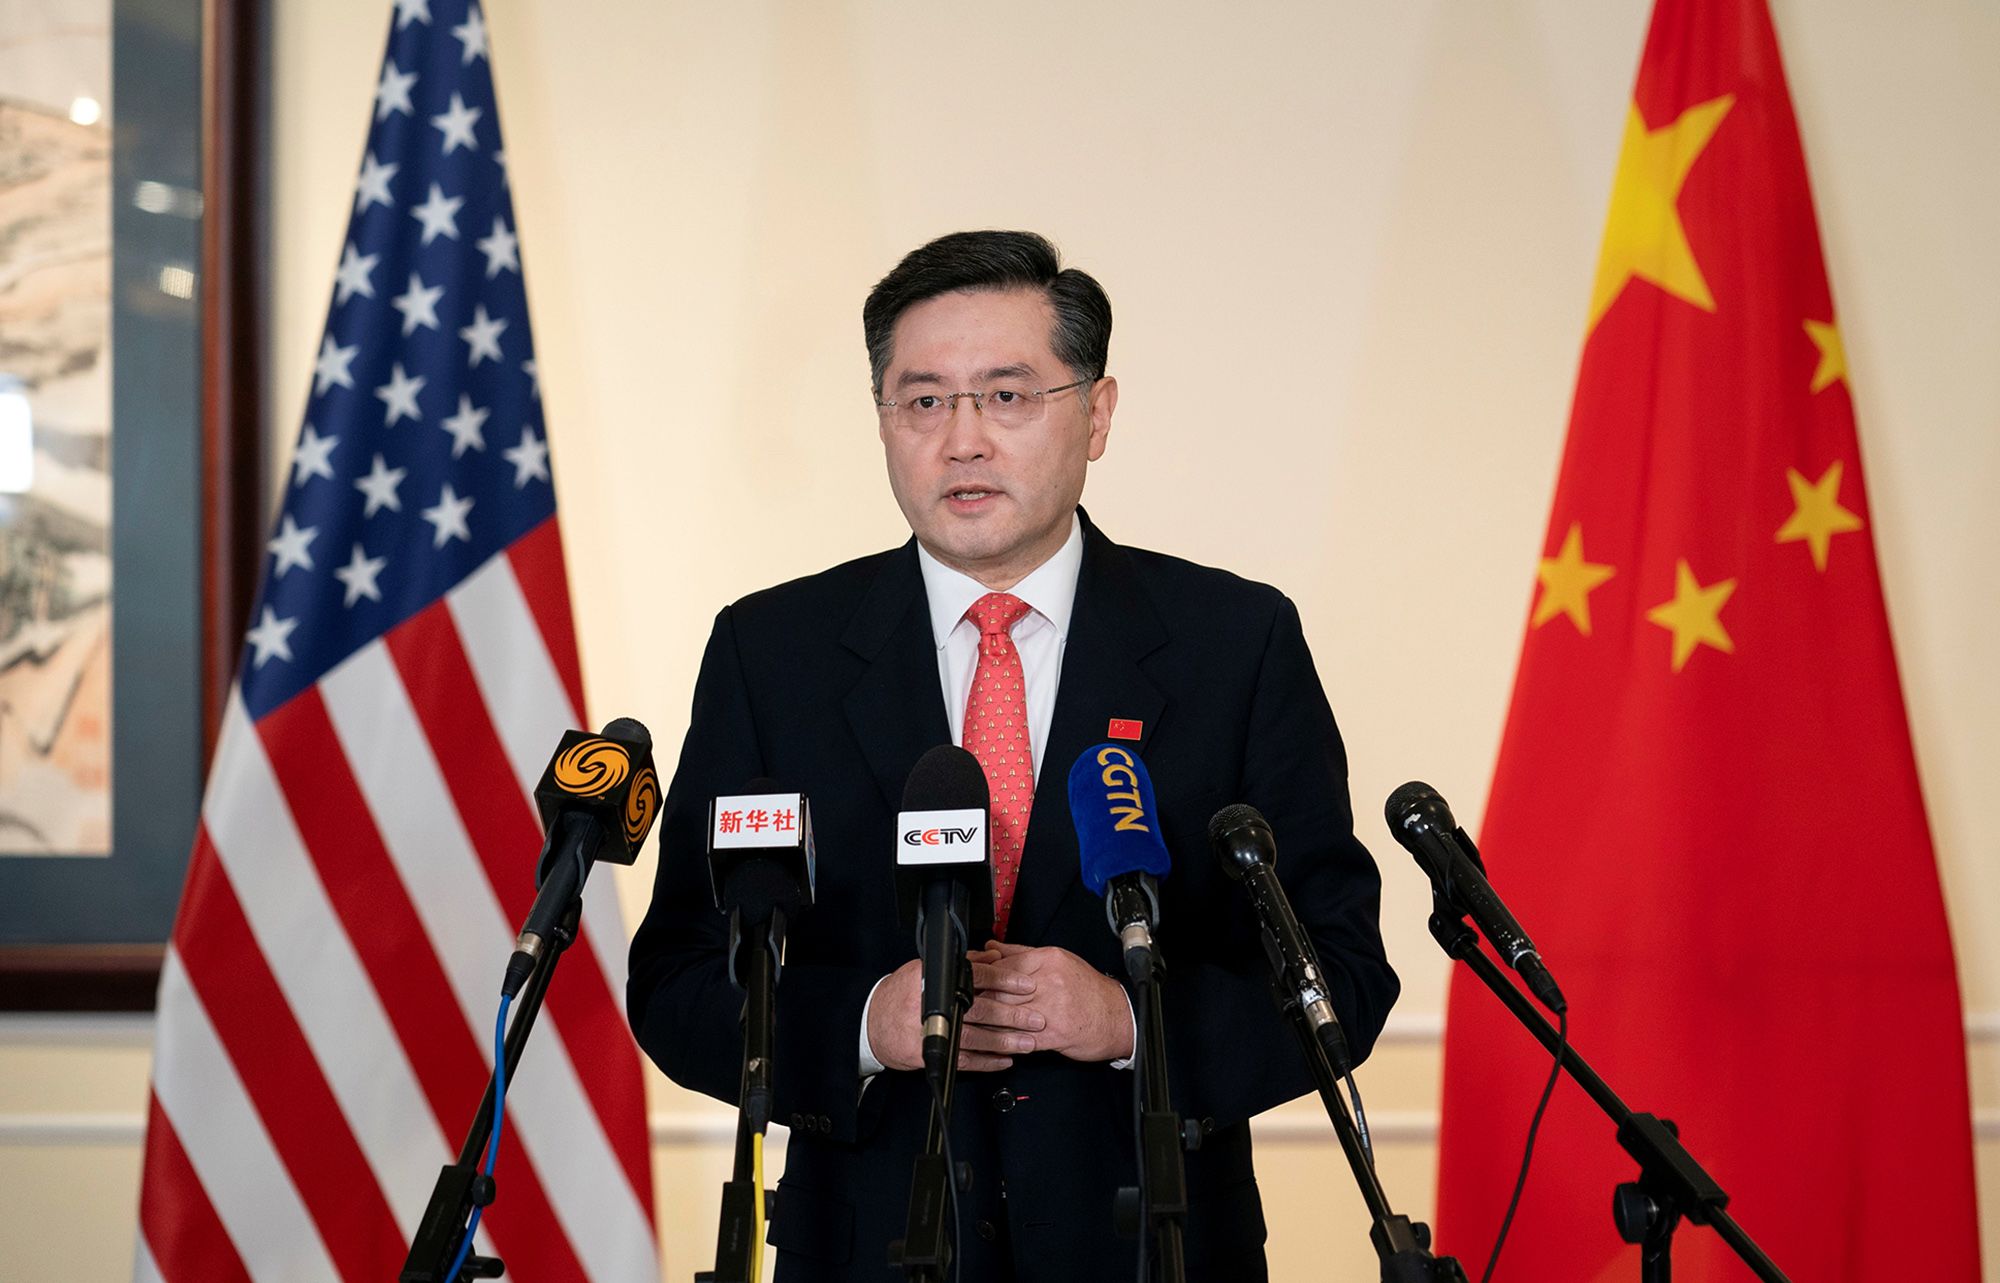 Qin Gang makes remarks to Chinese and U.S. media upon arrival in the United States on July 28, 2021. (Liu Jie/Xinhua/Getty Images)